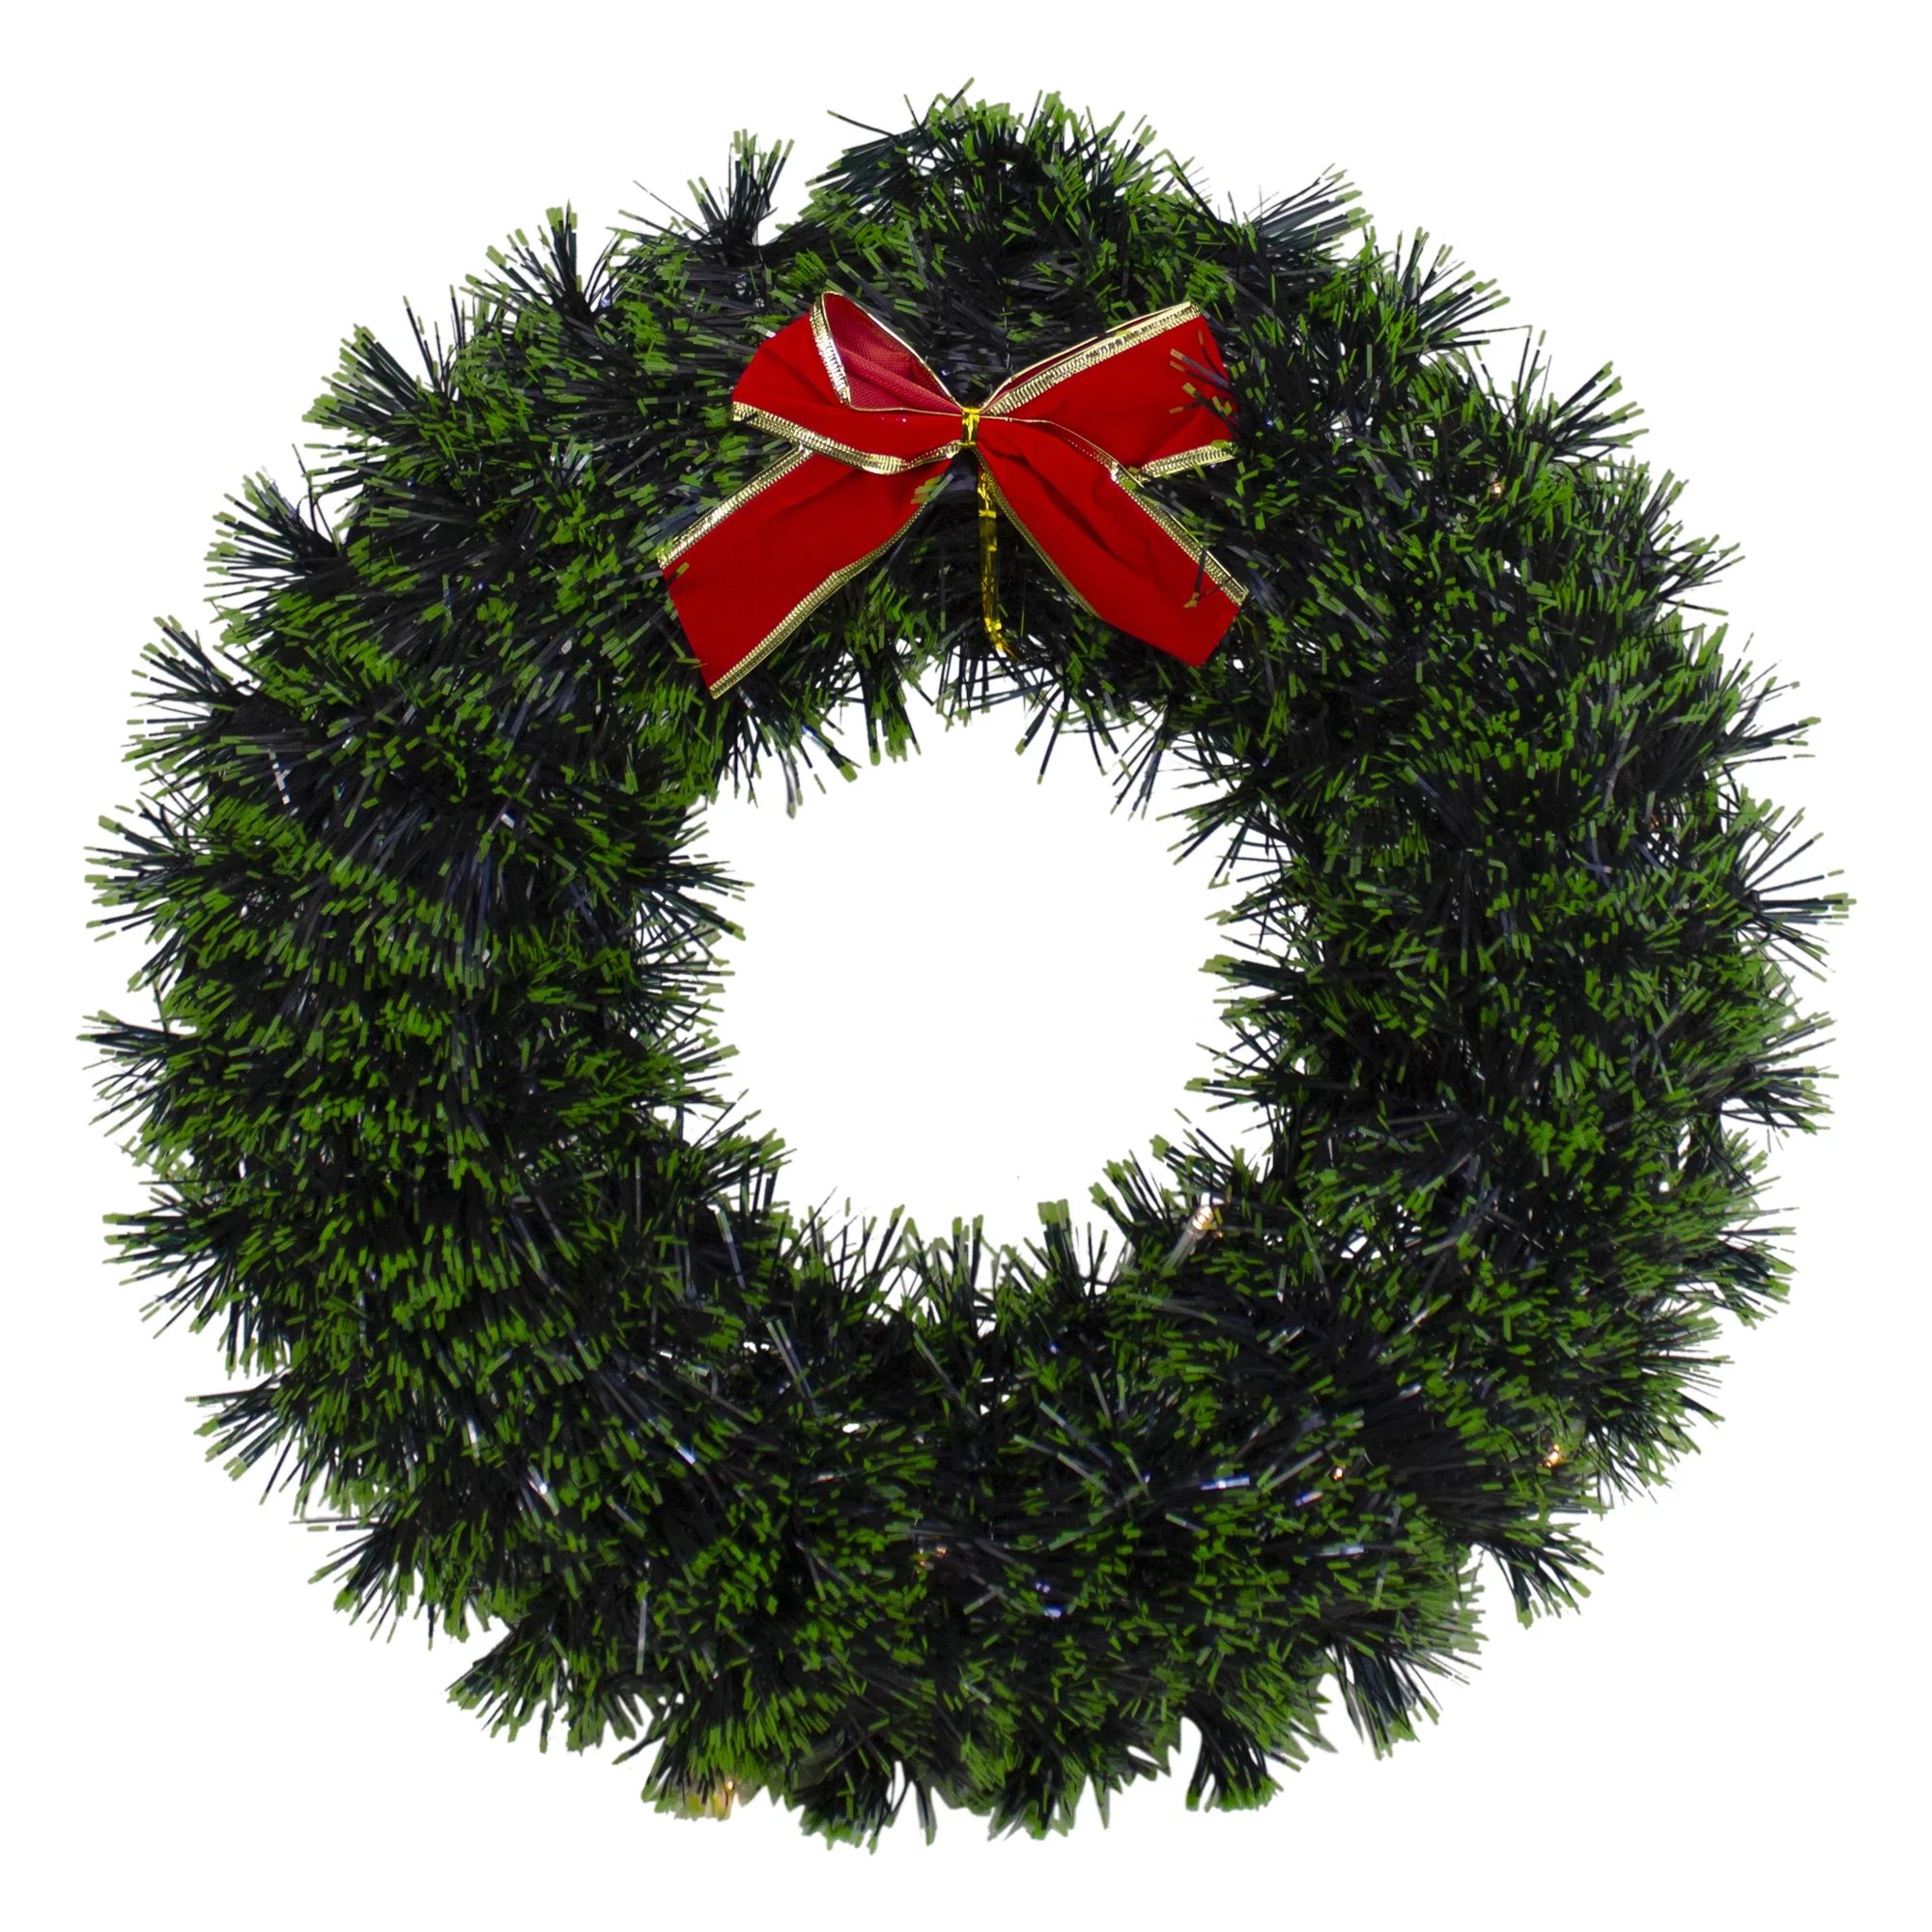 17" Pre-Lit Green Tinsel Artificial Christmas Wreath with a Bow - Clear LED Lights | Walmart (US)